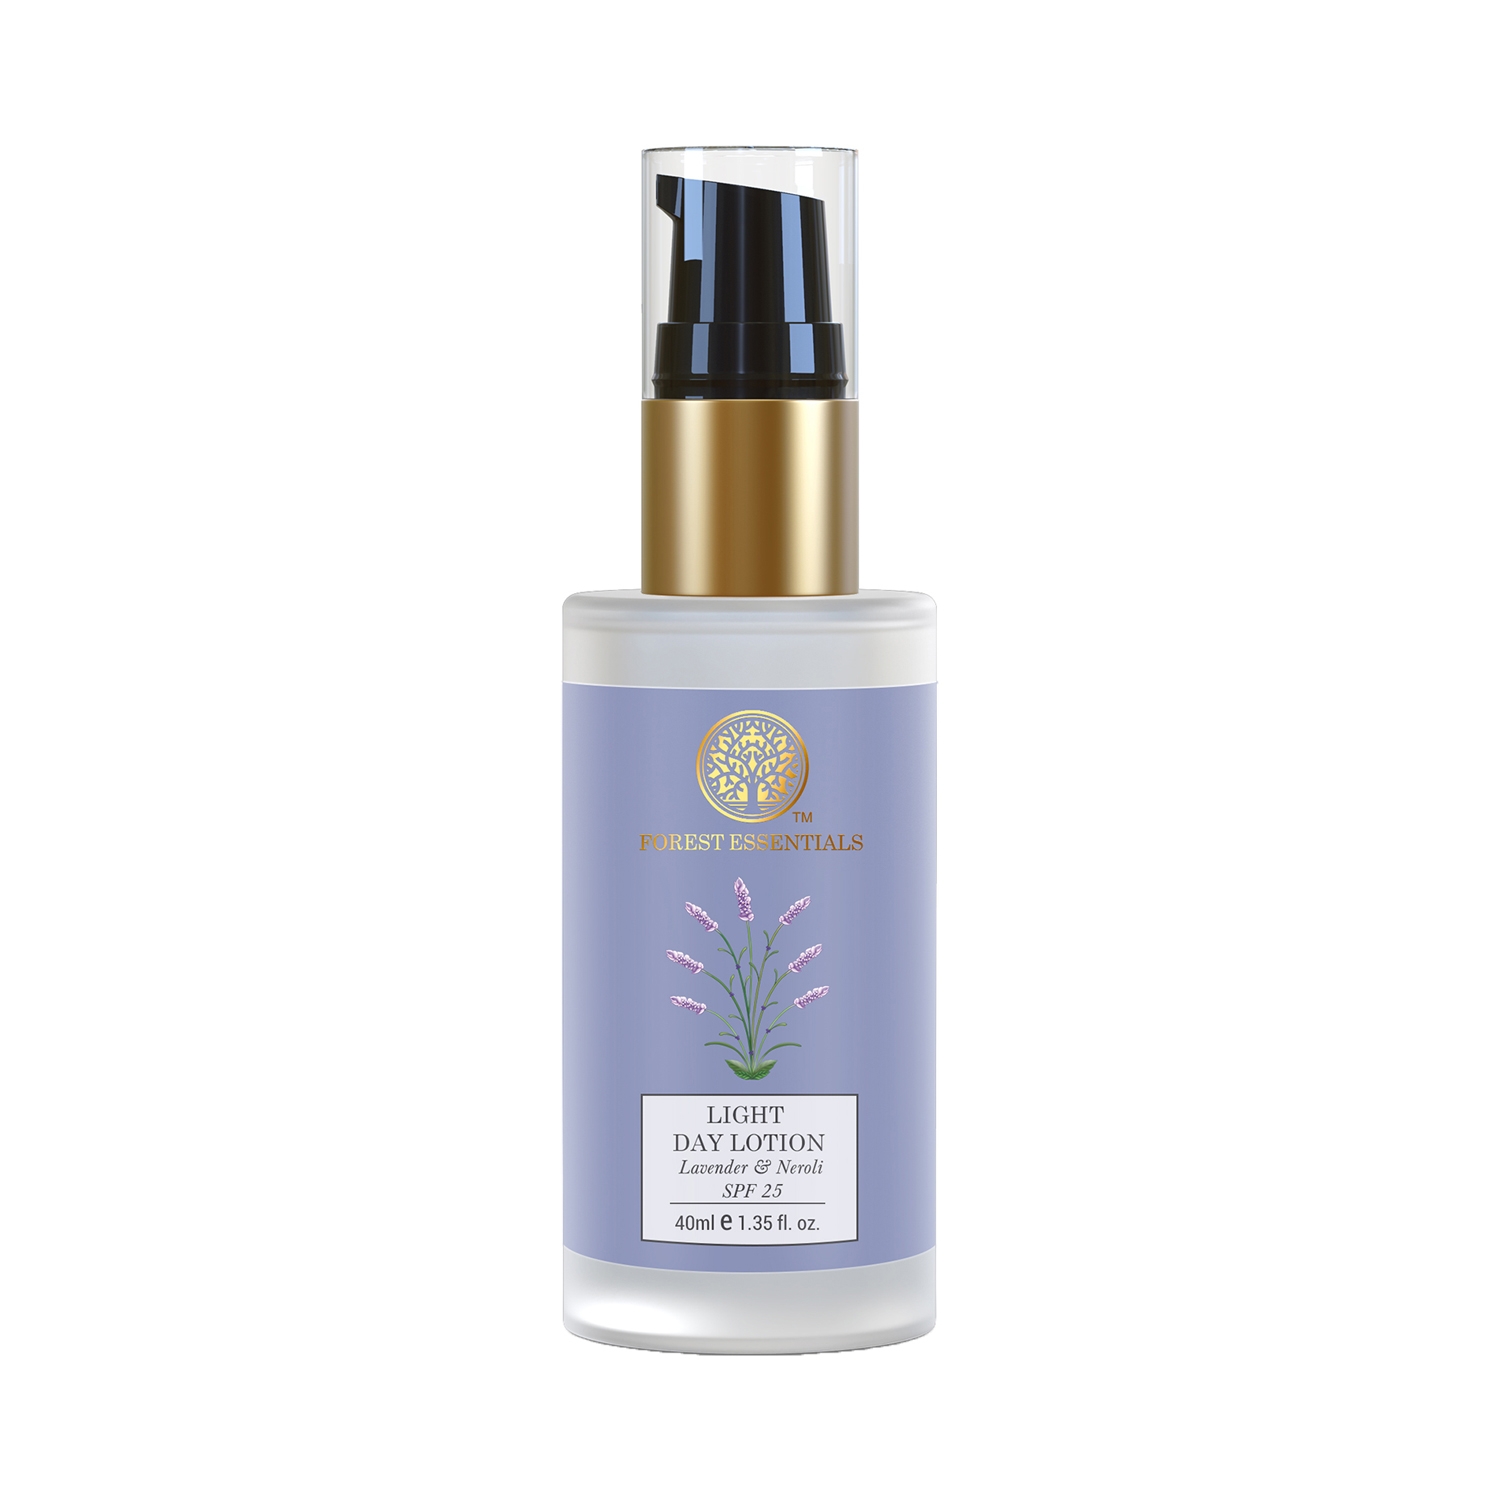 Forest Essentials Lavender & Neroli Light Day Lotion with SPF 25 (40ml)